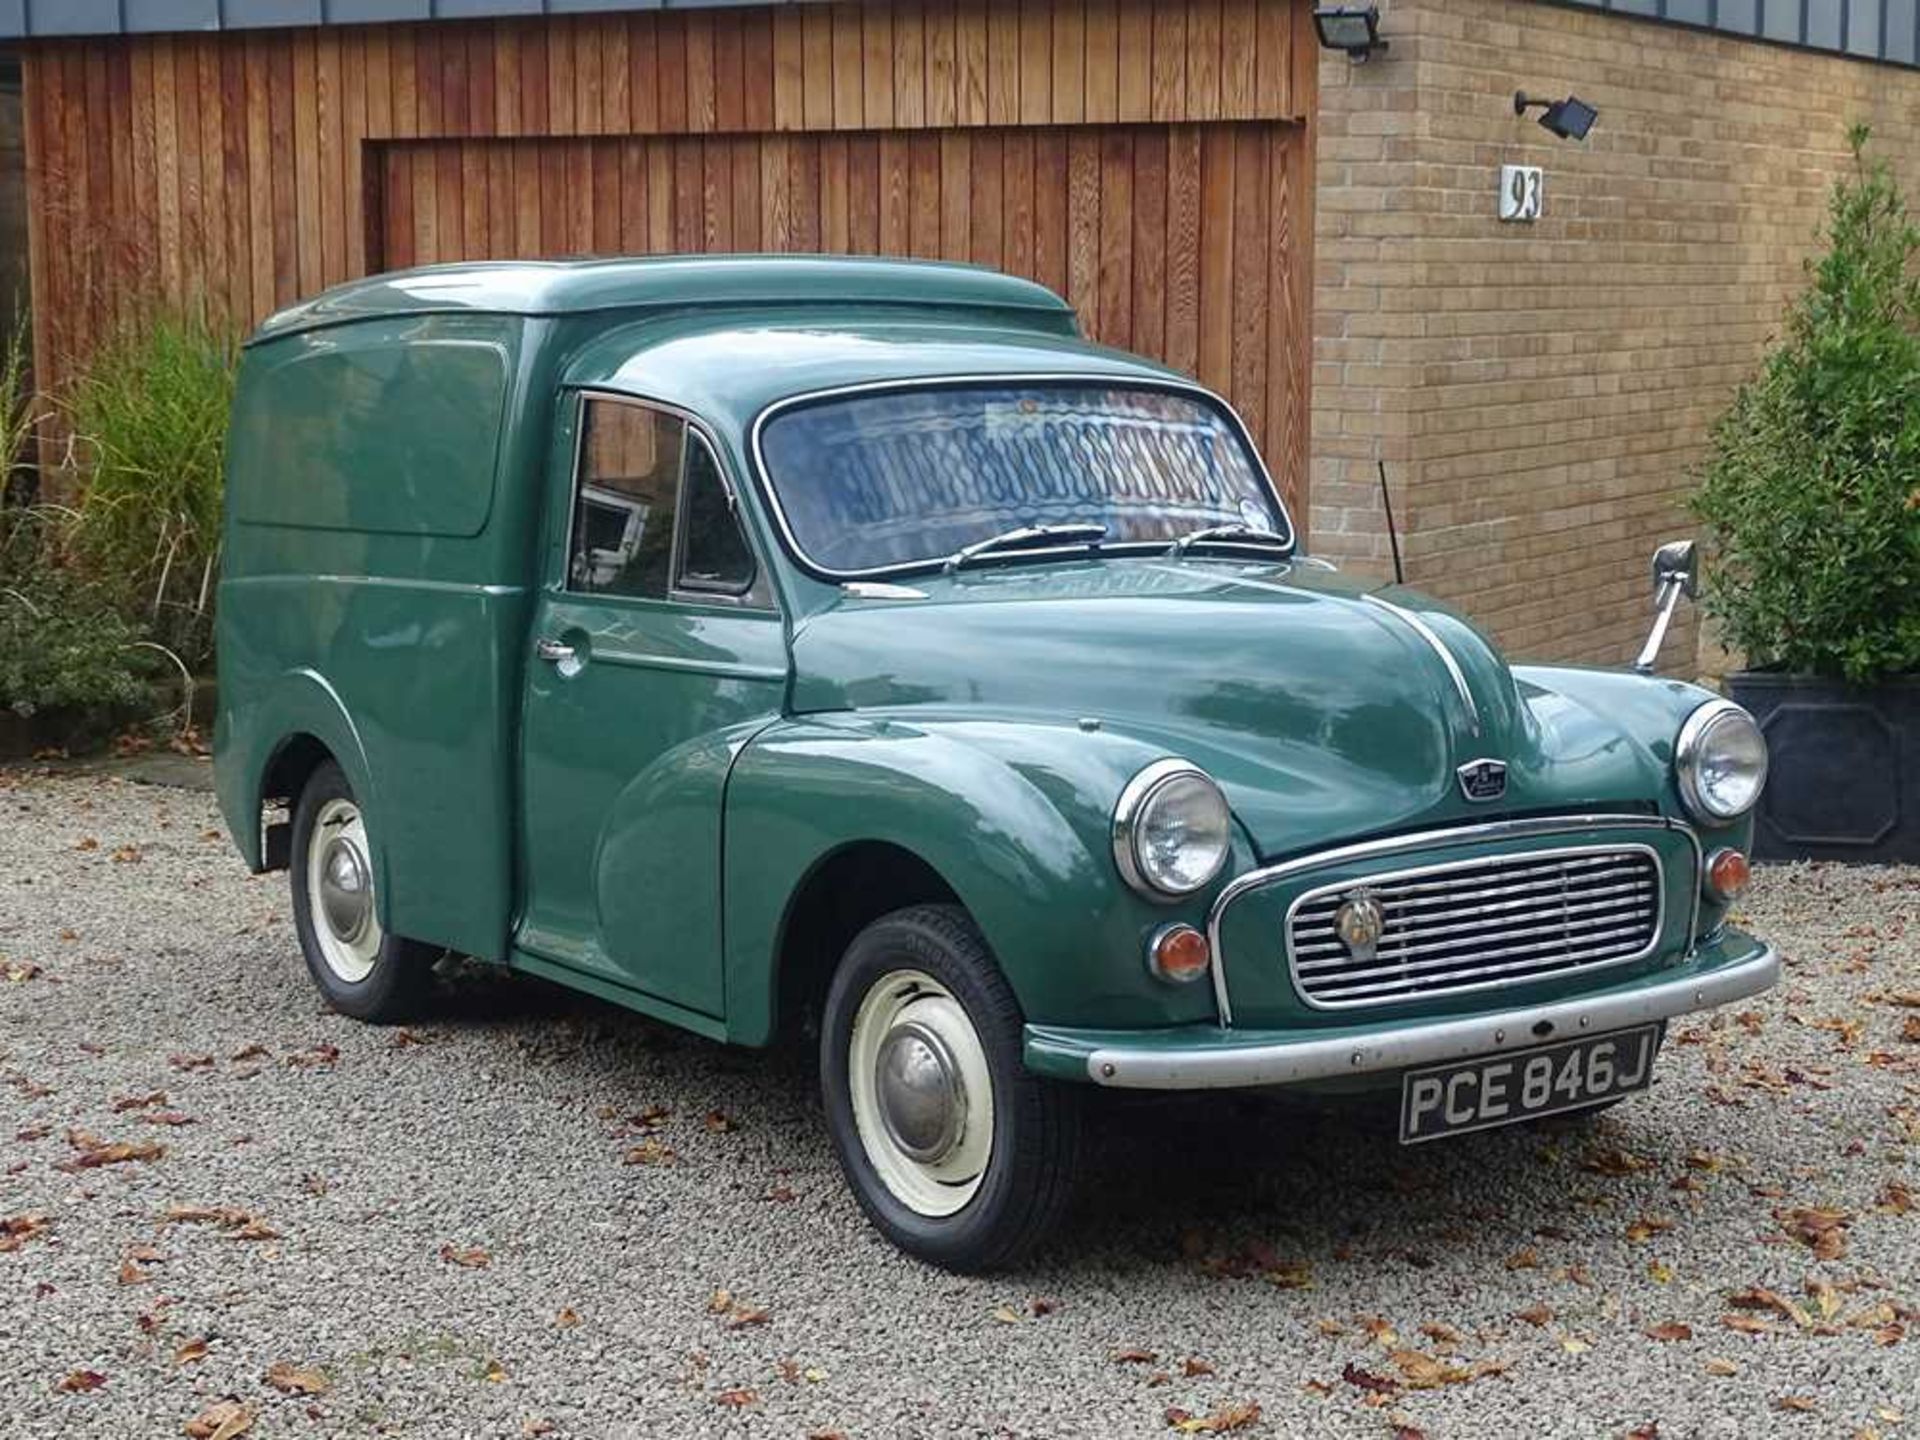 1970 Austin 6 CWT Van Single Family Ownership From New - Image 5 of 45